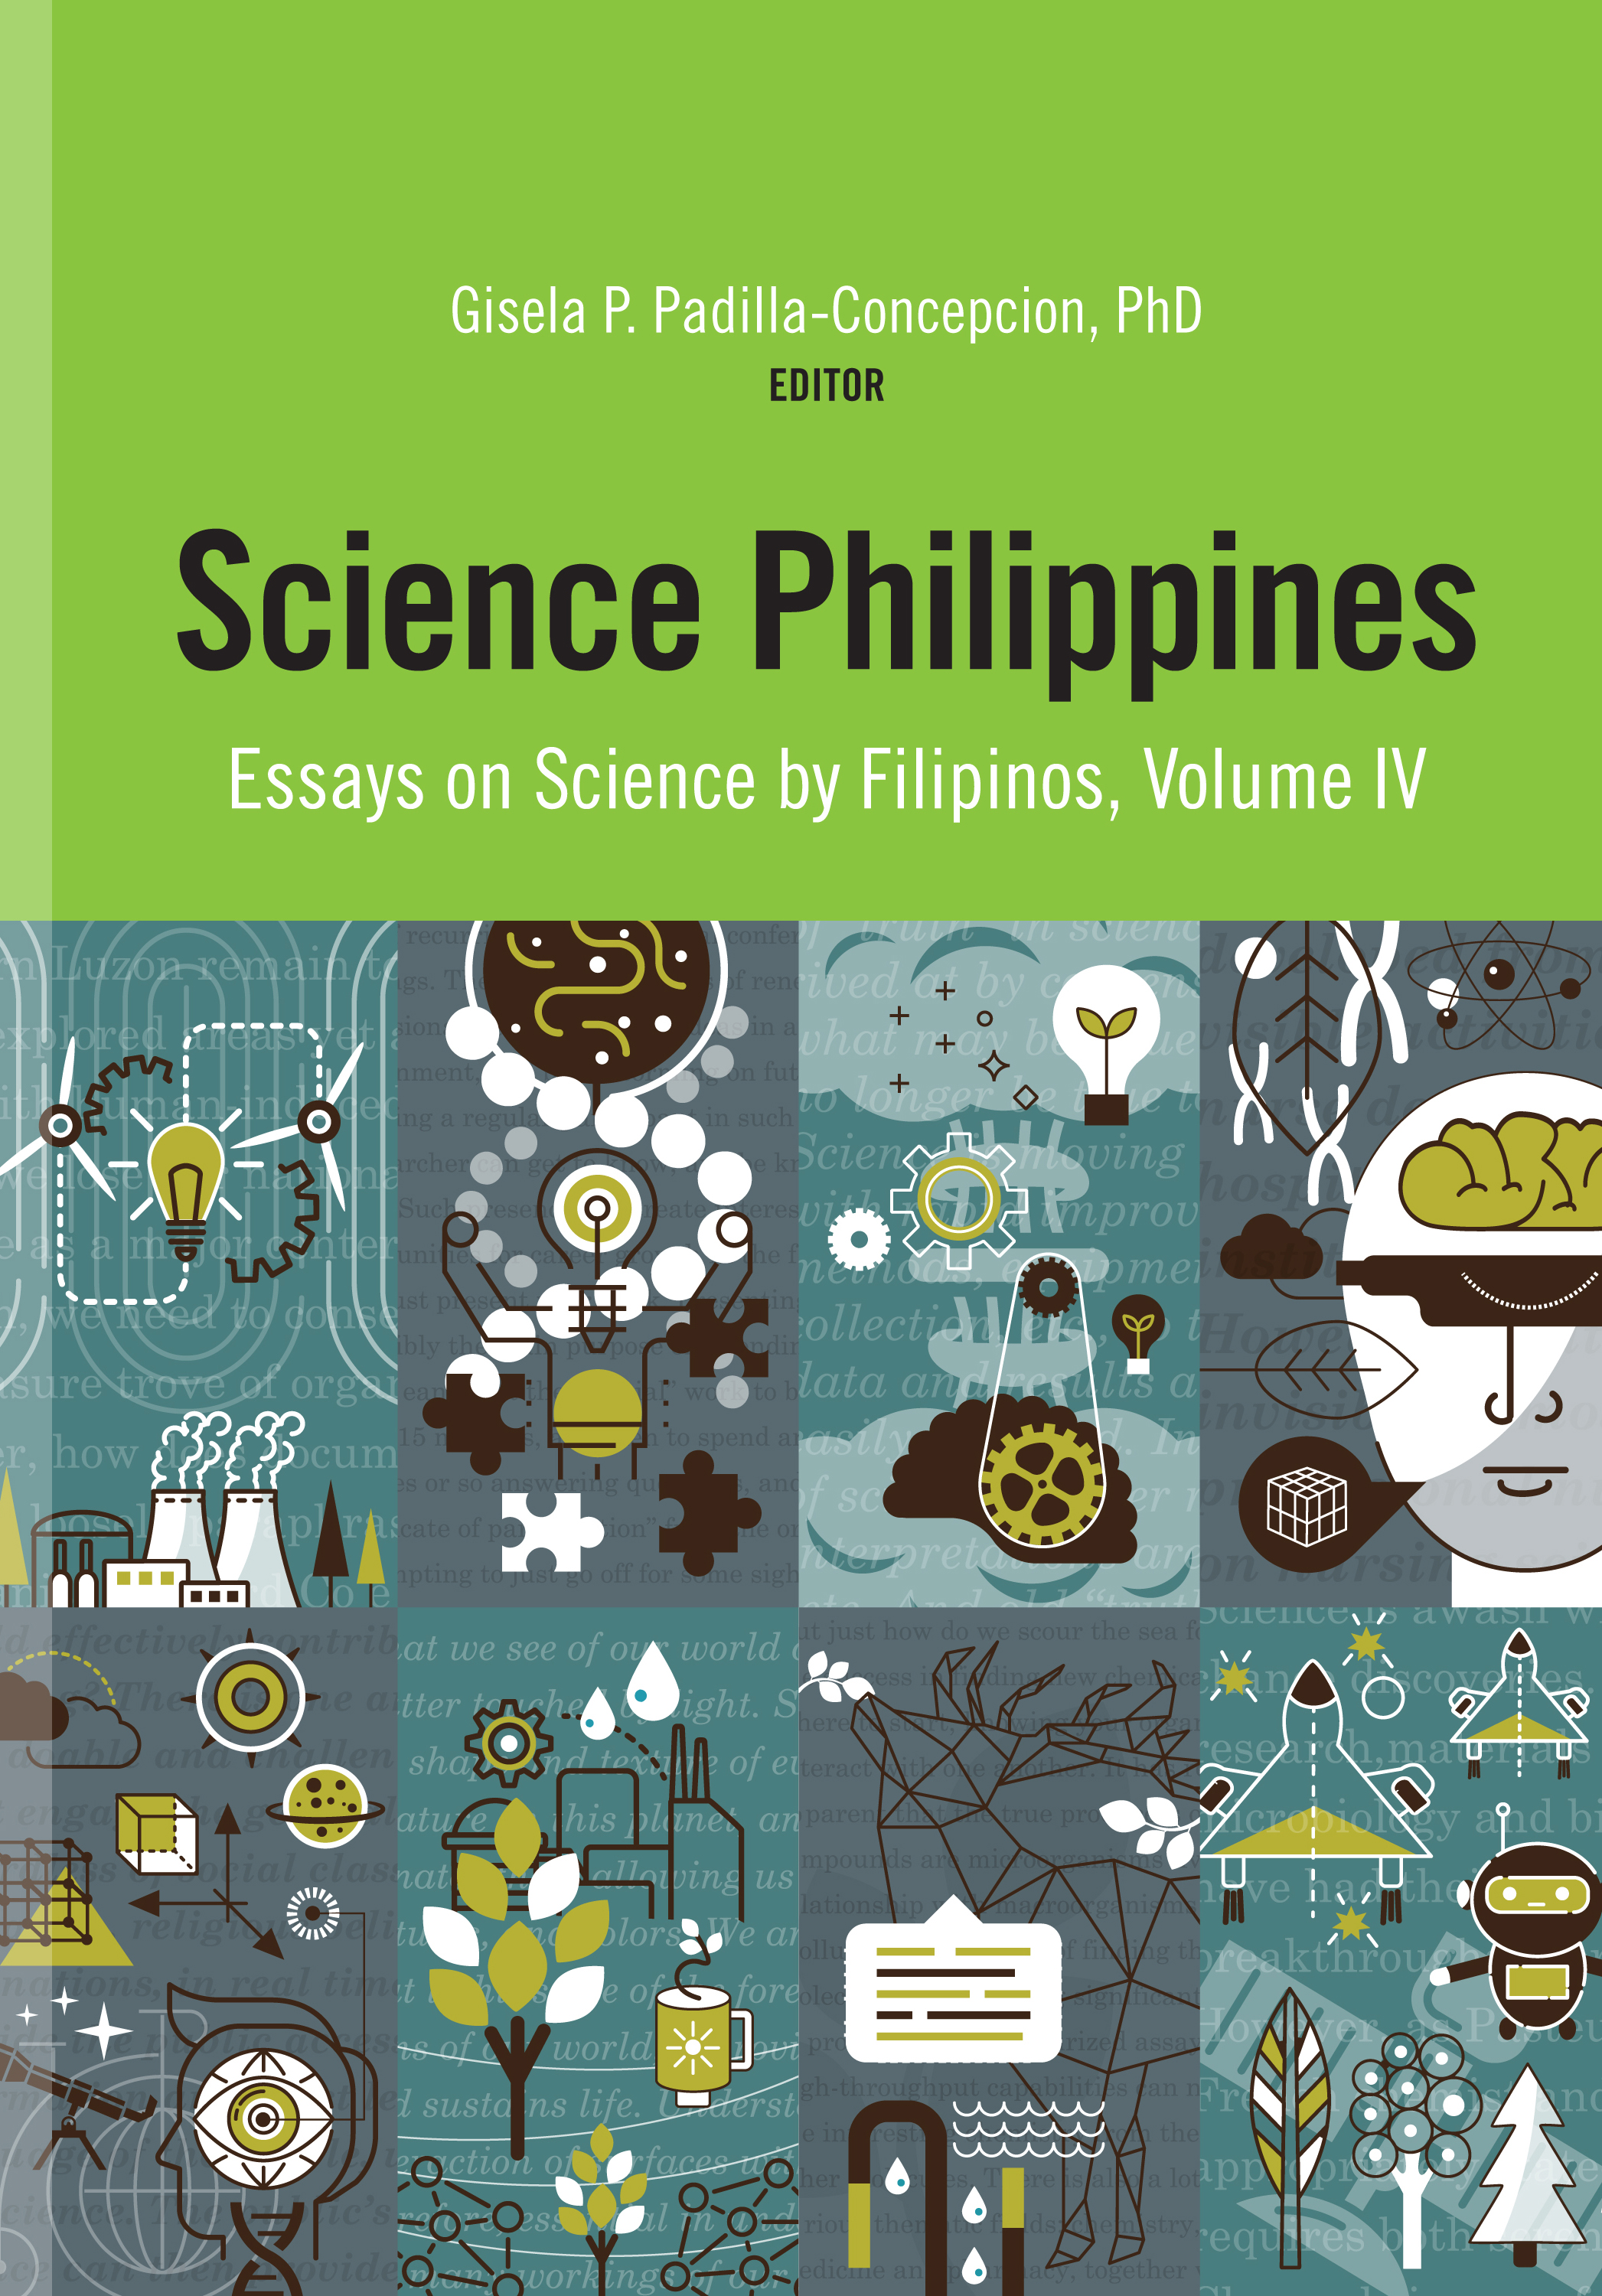 science education in the philippines essay brainly